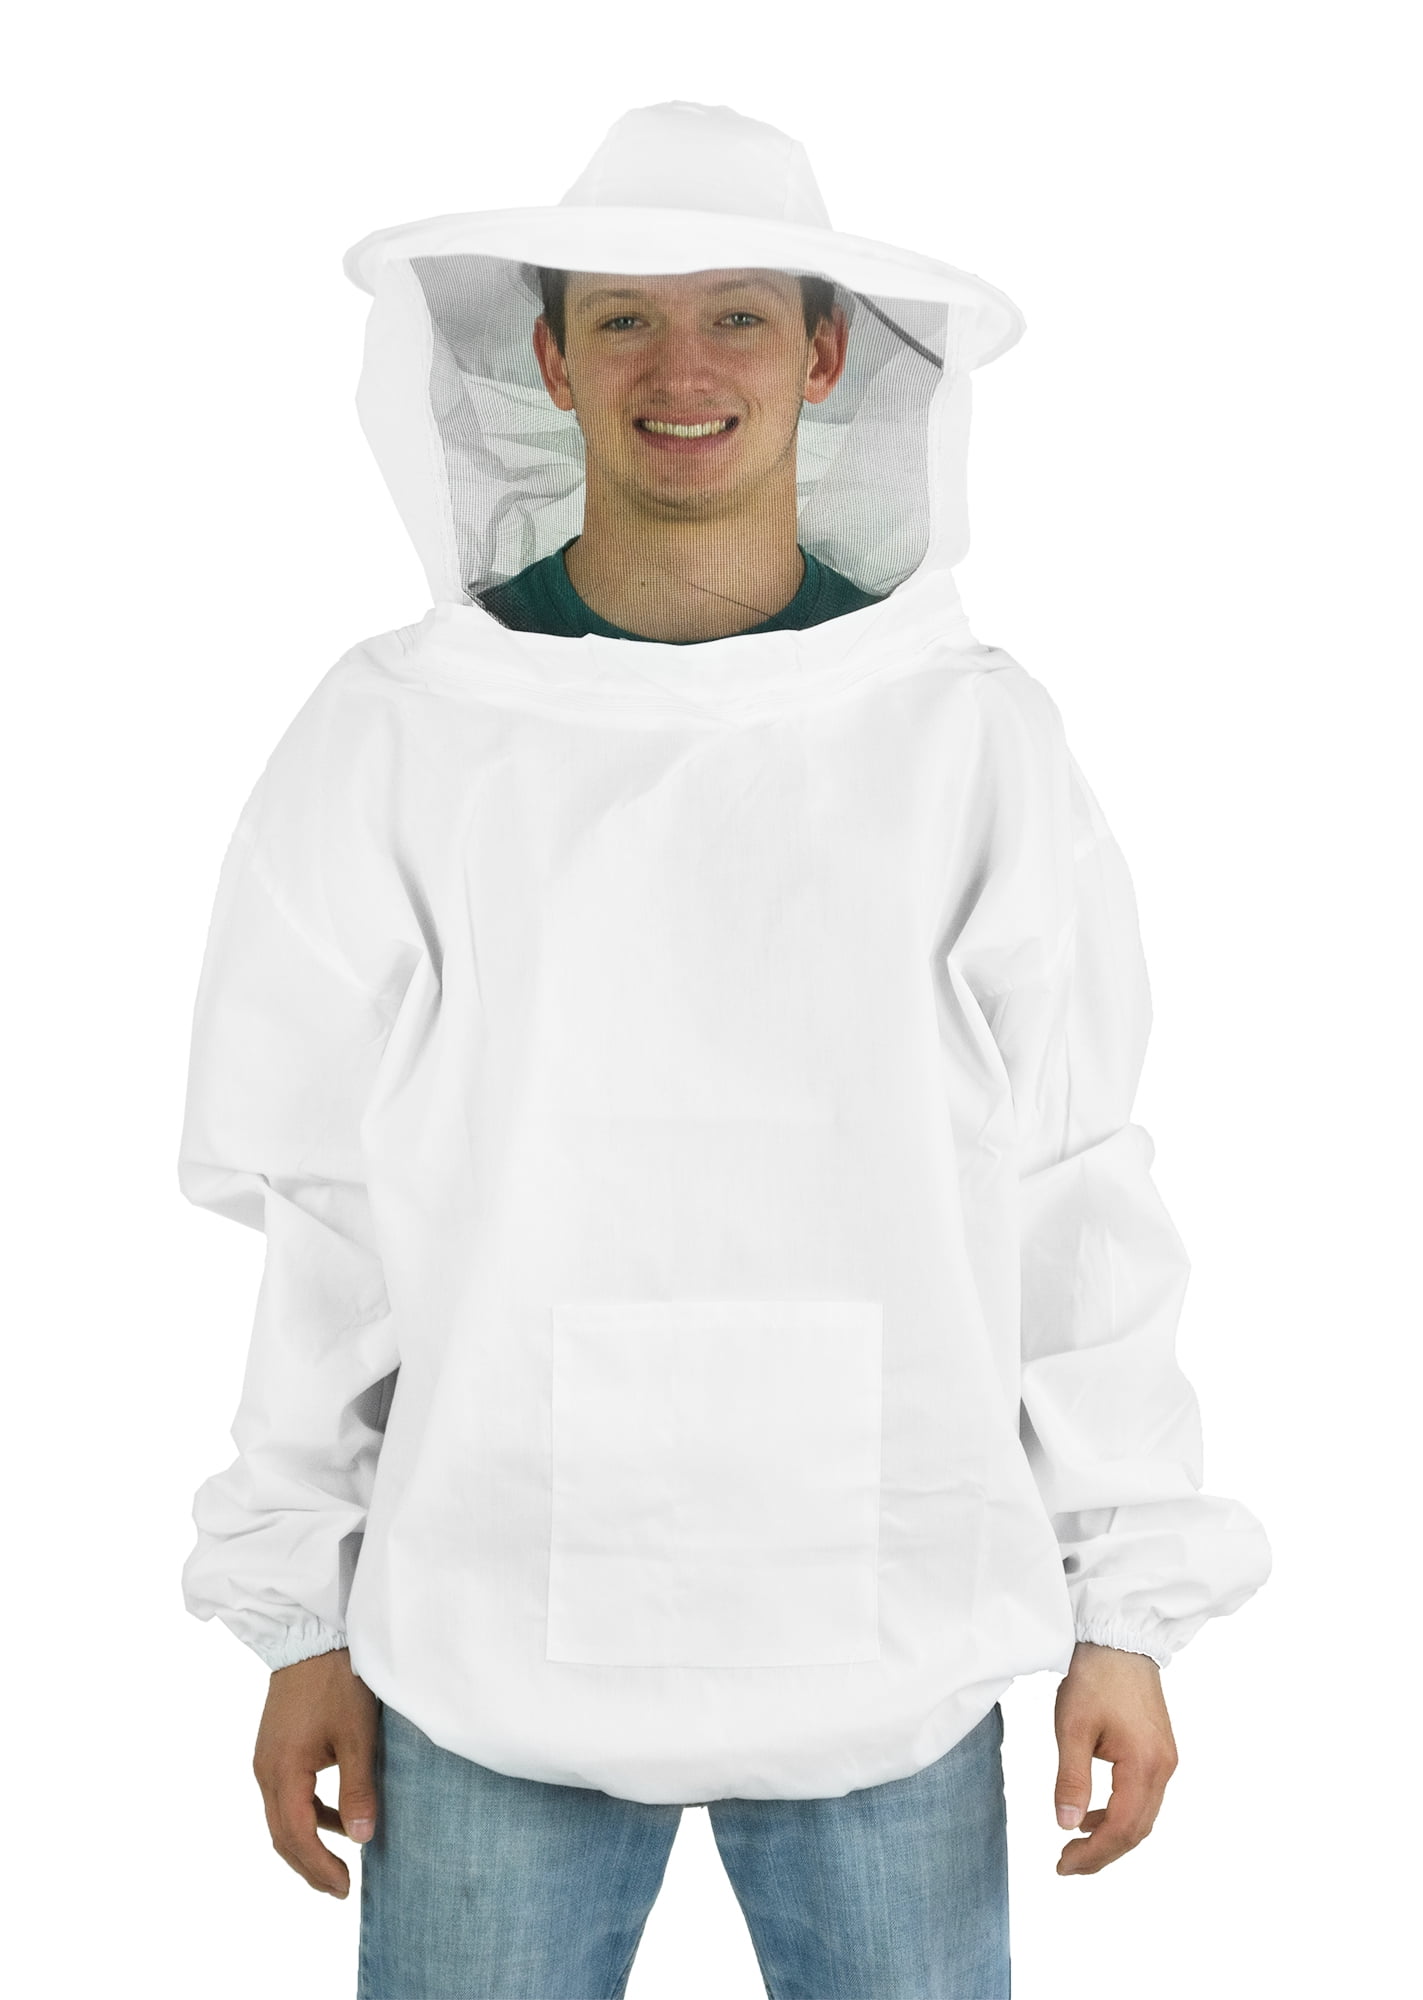 Beekeeping Protective Jacket Veil Dress Suit With Pull Hat Smock White Uniforms 